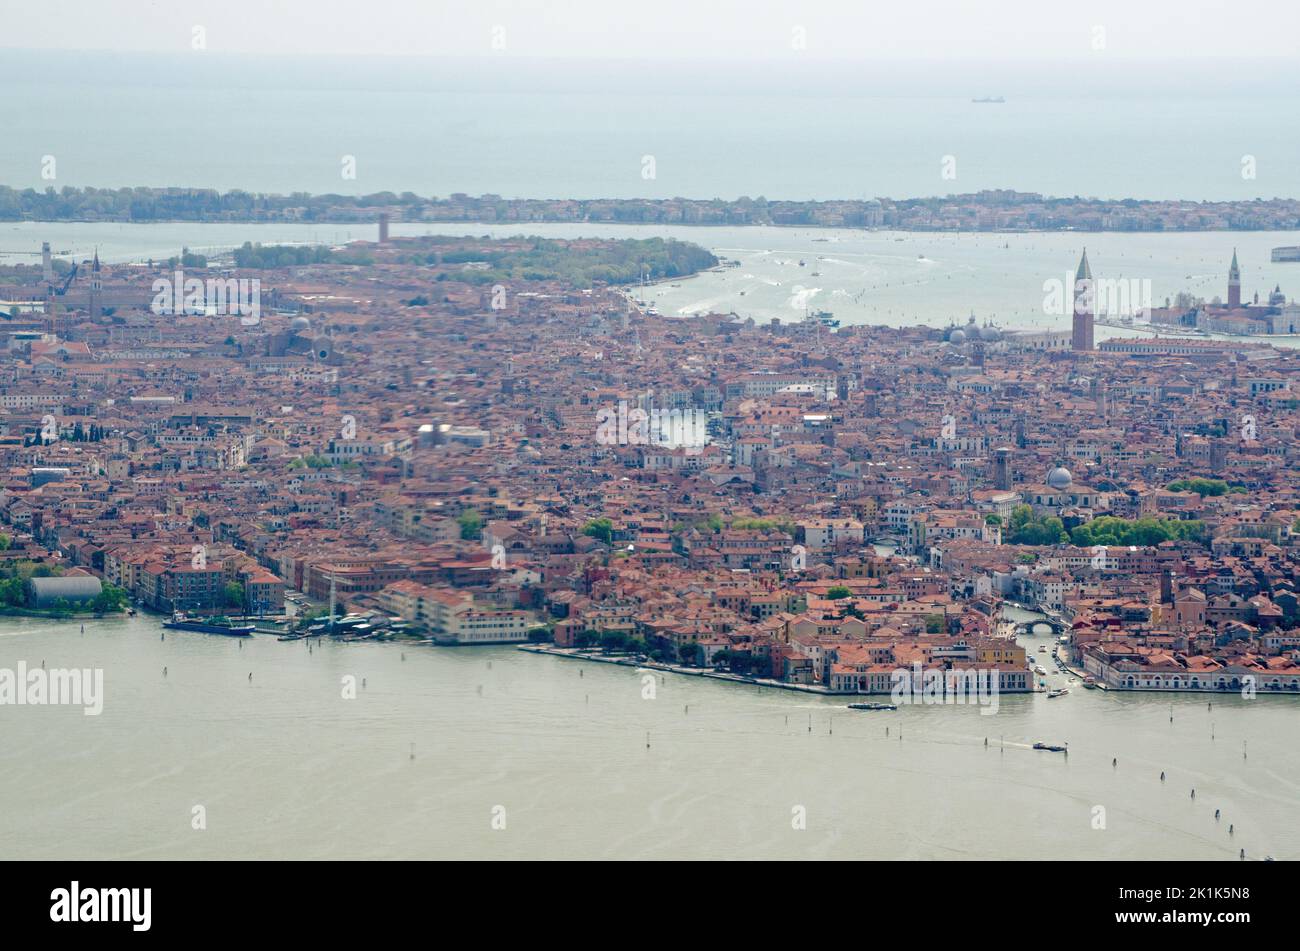 View from a plane overlooking the historic centre of Venice with the entrance to the Cannaregio Canal at the bottom right of the image. Stock Photo